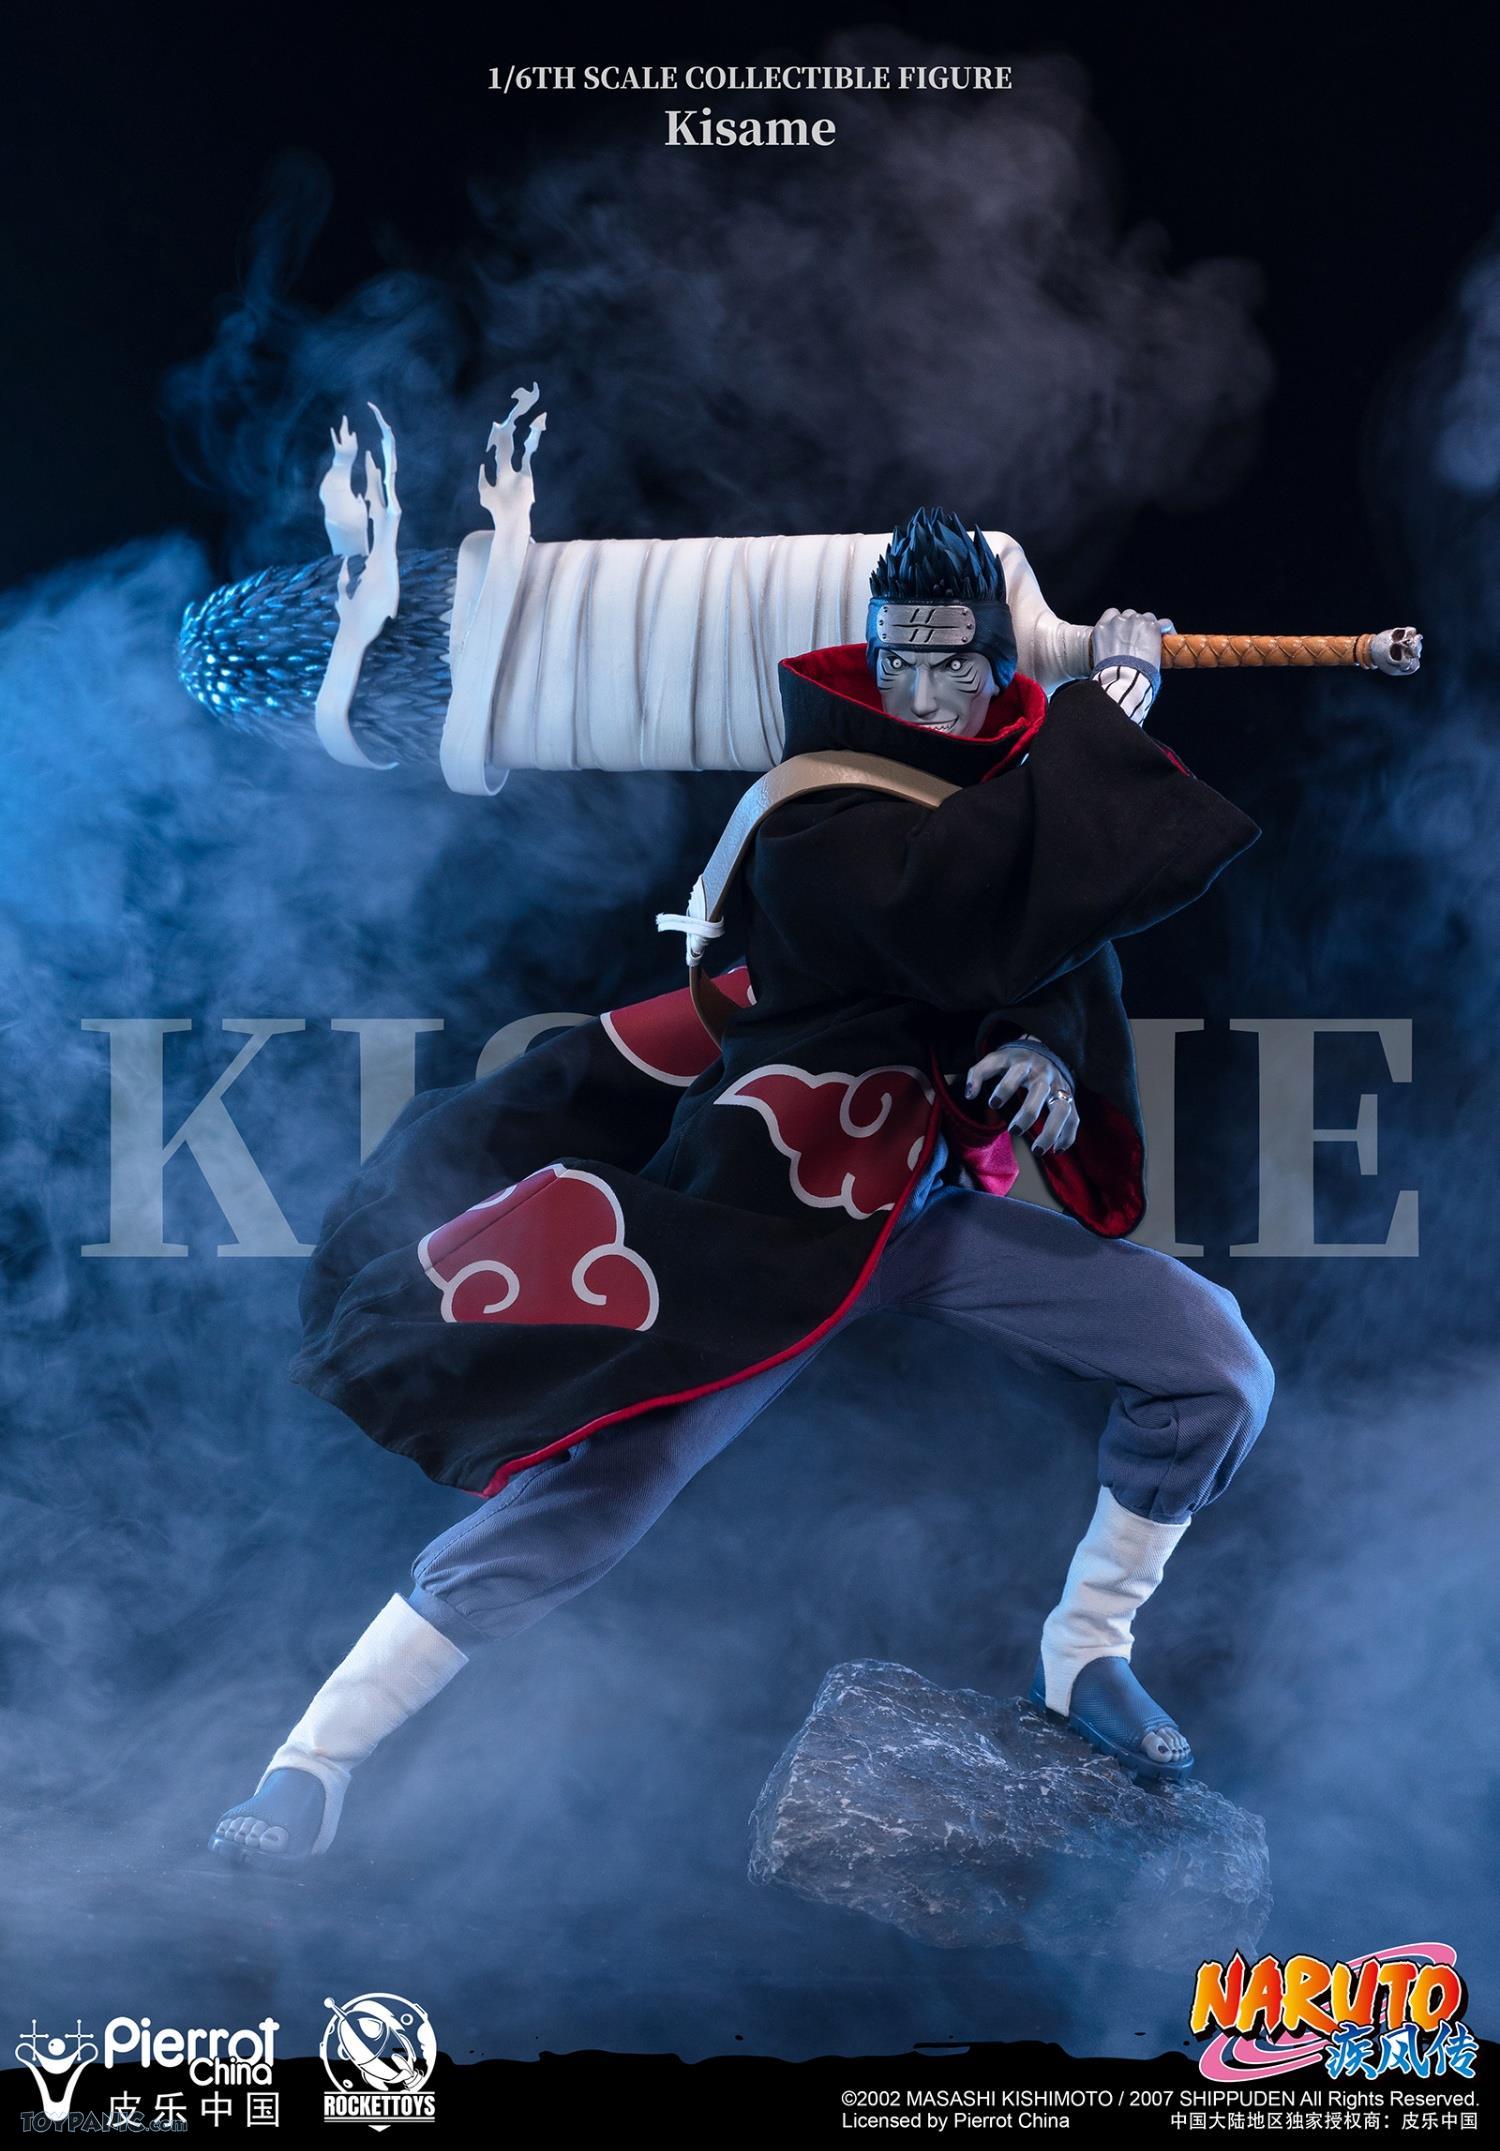 fantasy - NEW PRODUCT: Rocket Toys ROC-007 1/6 Scale Kisame 221202460434PM_6591732